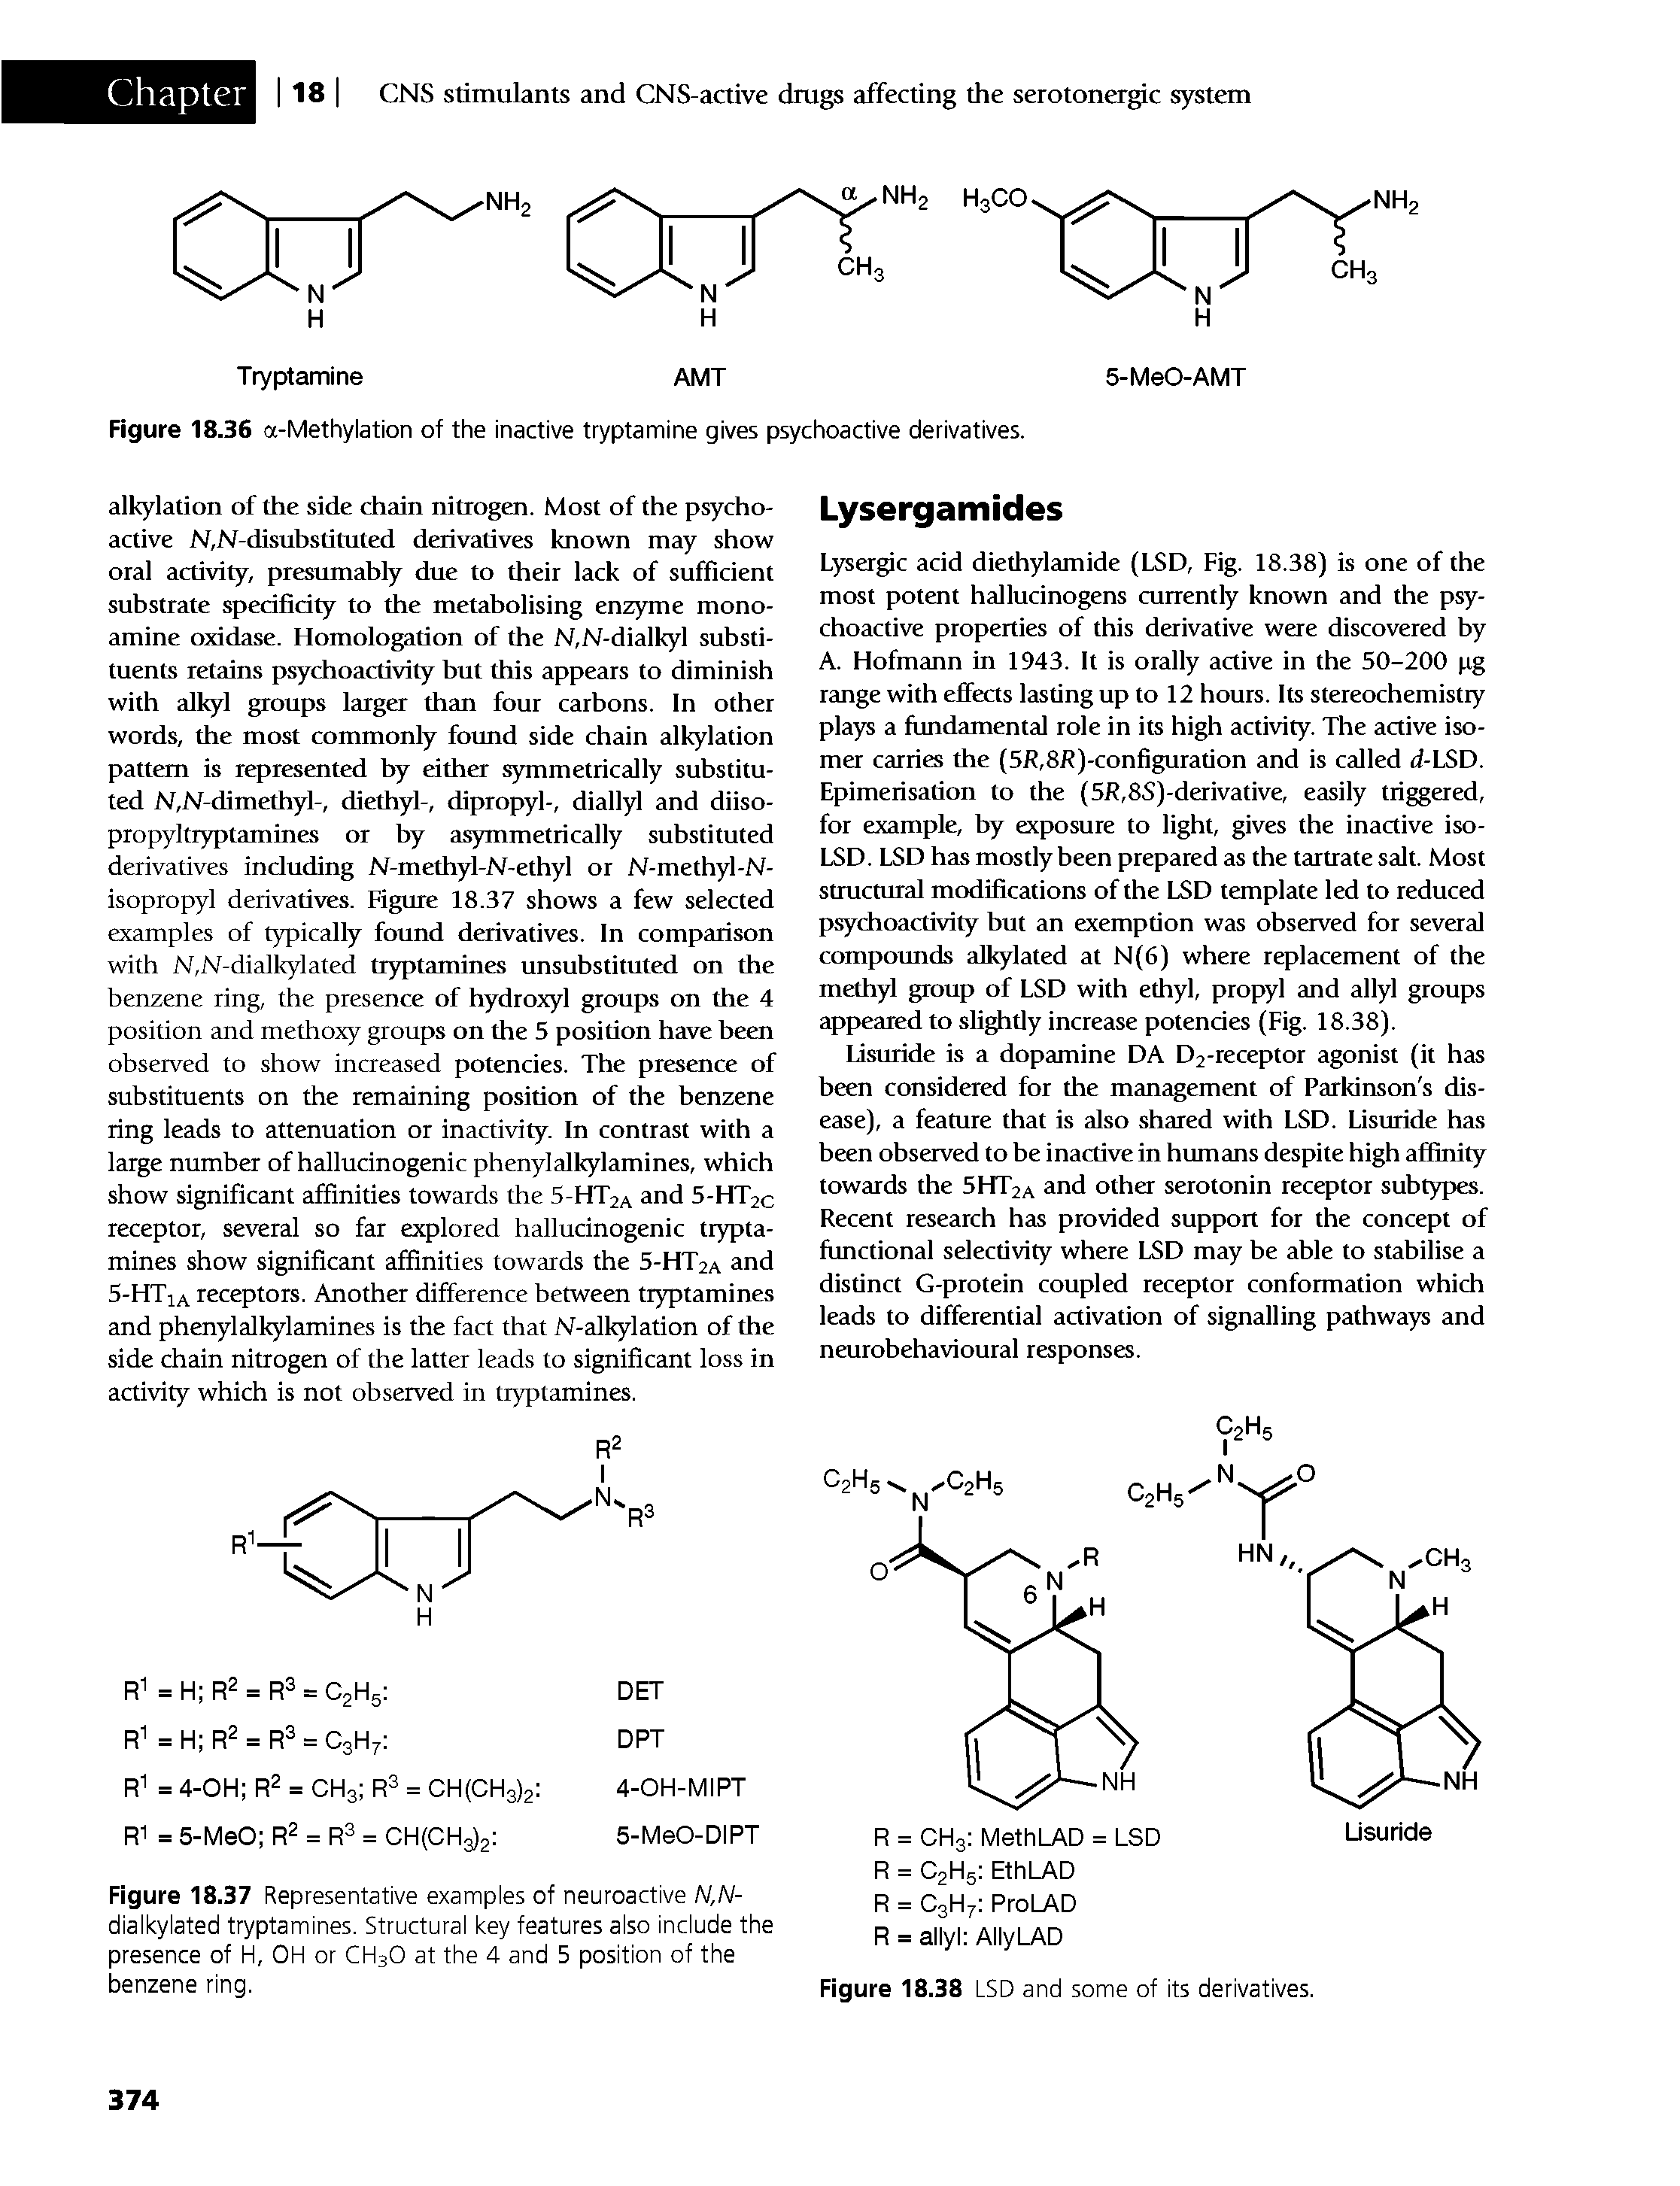 Figure 18.37 Representative examples of neuroactive N,N-dialkylated tryptamines. Structural key features also include the presence of H, OH or CH3O at the 4 and 5 position of the benzene ring.